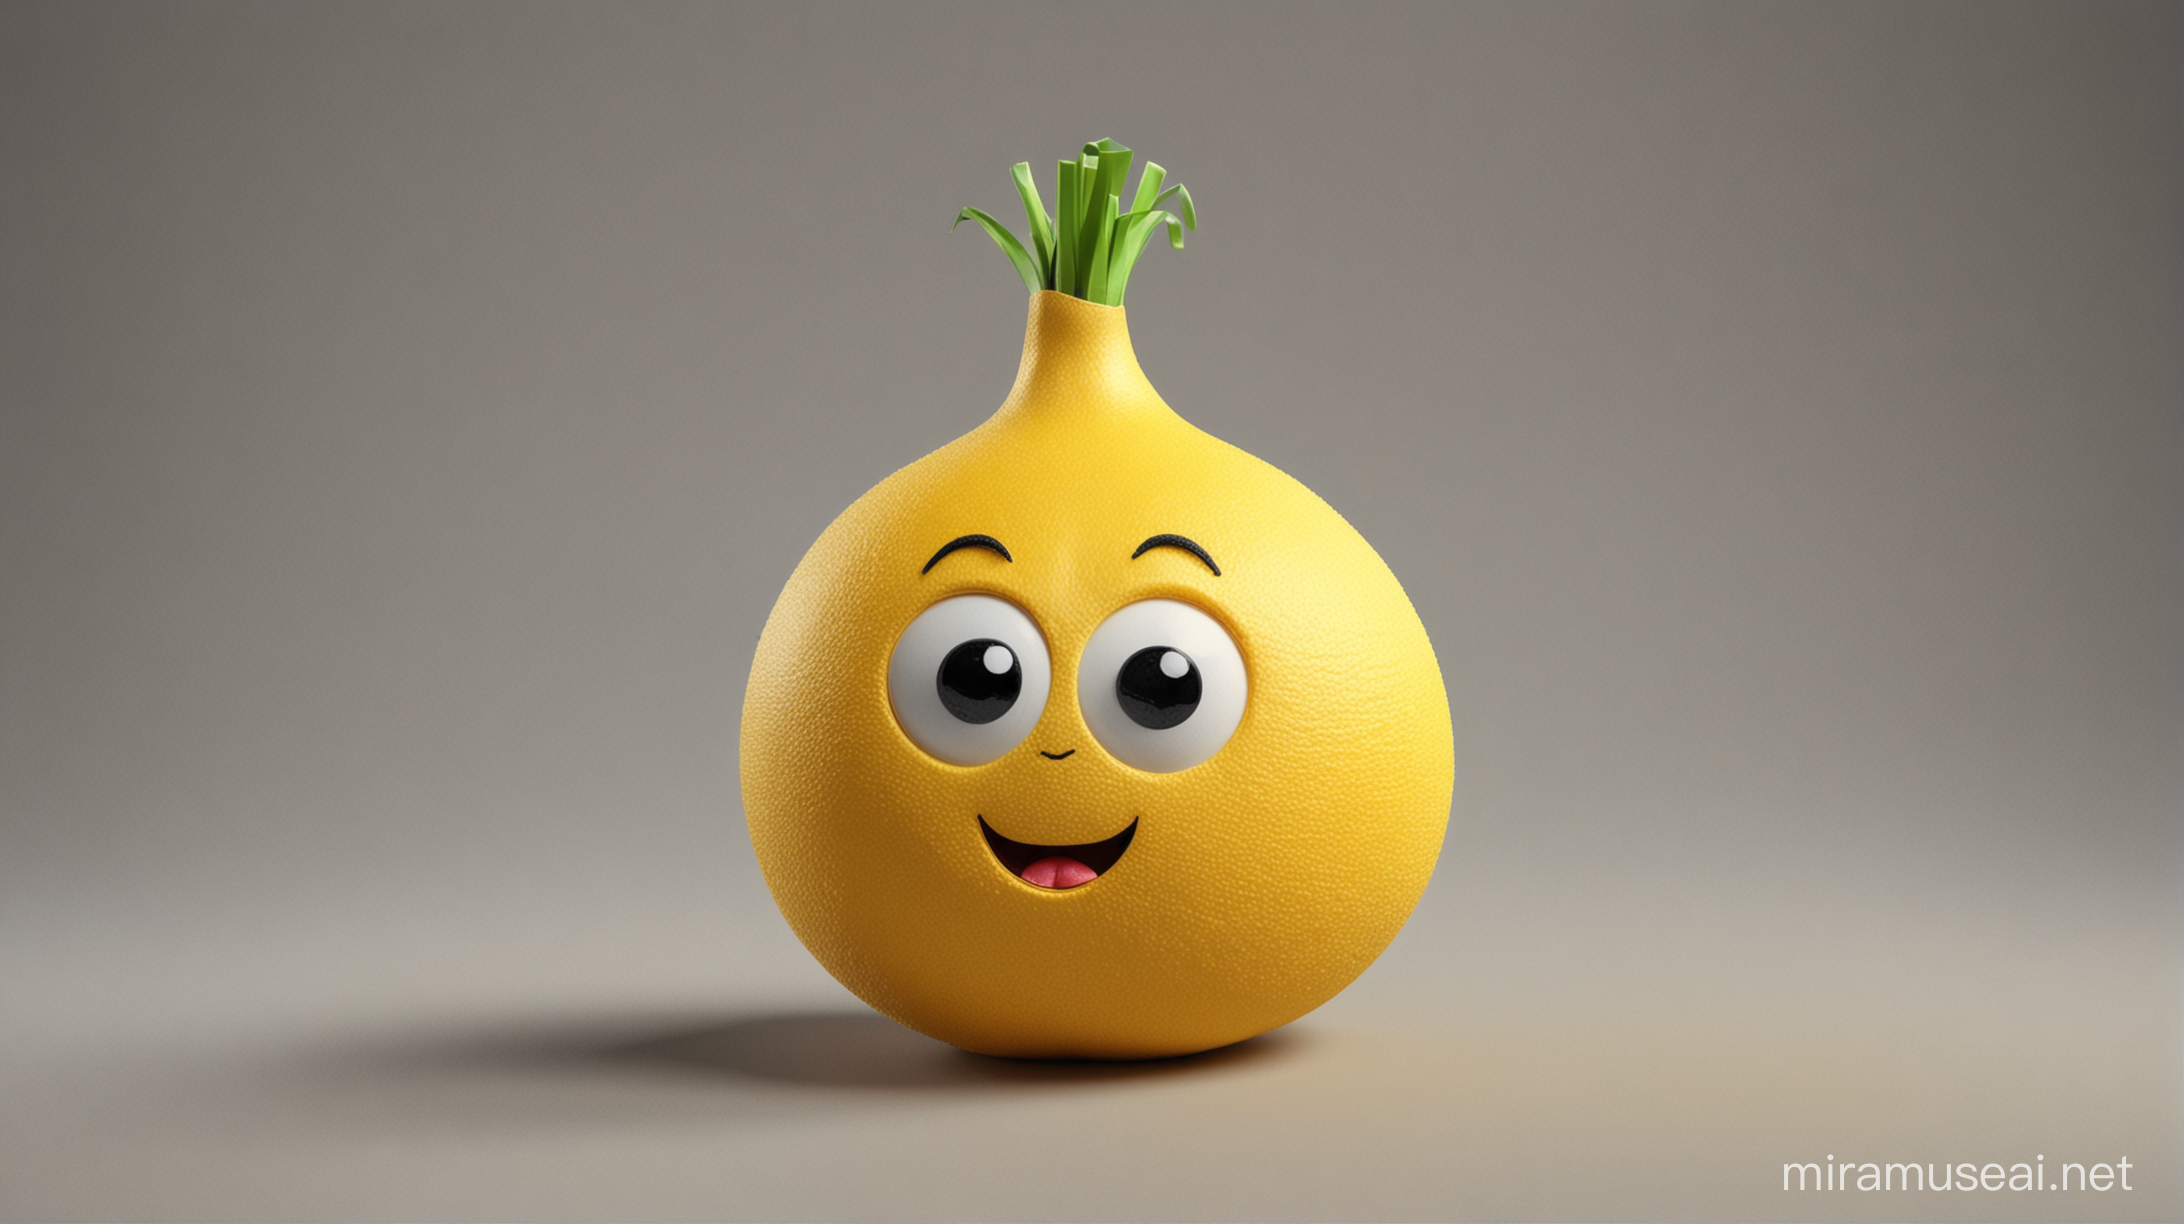 Cheerful Yellow Onion Stuffed Toy with Playful Eyes on Plain Background